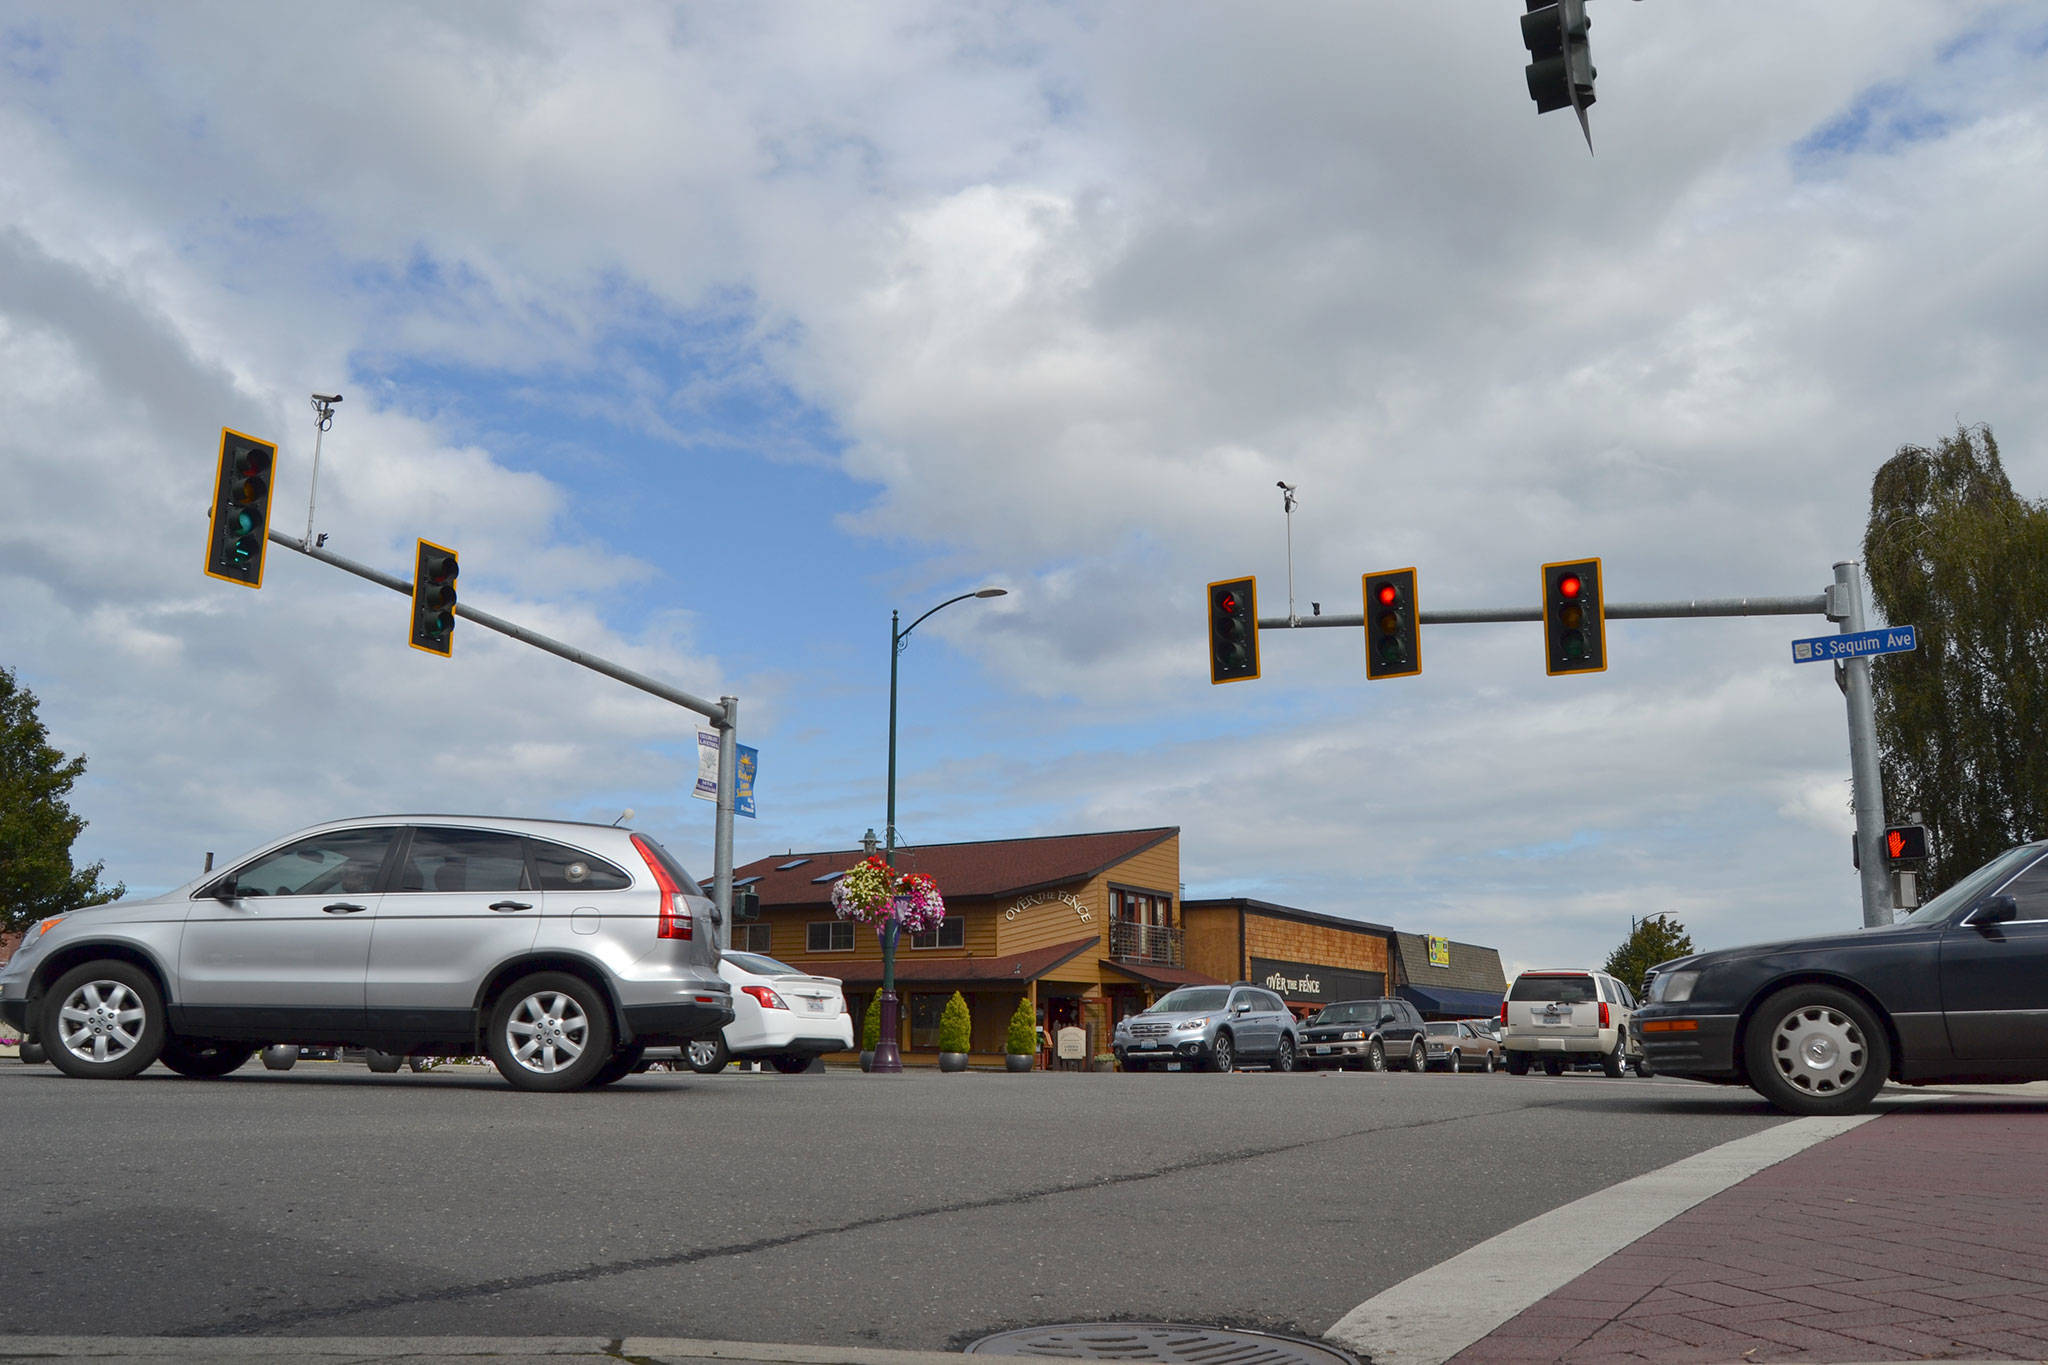 Within the next year, staff with the City of Sequim plan to install flashing yellow lights in left-turn lanes at the Sequim Avenue/Washington Street intersection to help flow traffic more east-west. By installing that and making a few other changes, city staff anticipate lowering the average wait time to turn left by more than 20 seconds. Sequim Gazette photo by Matthew Nash